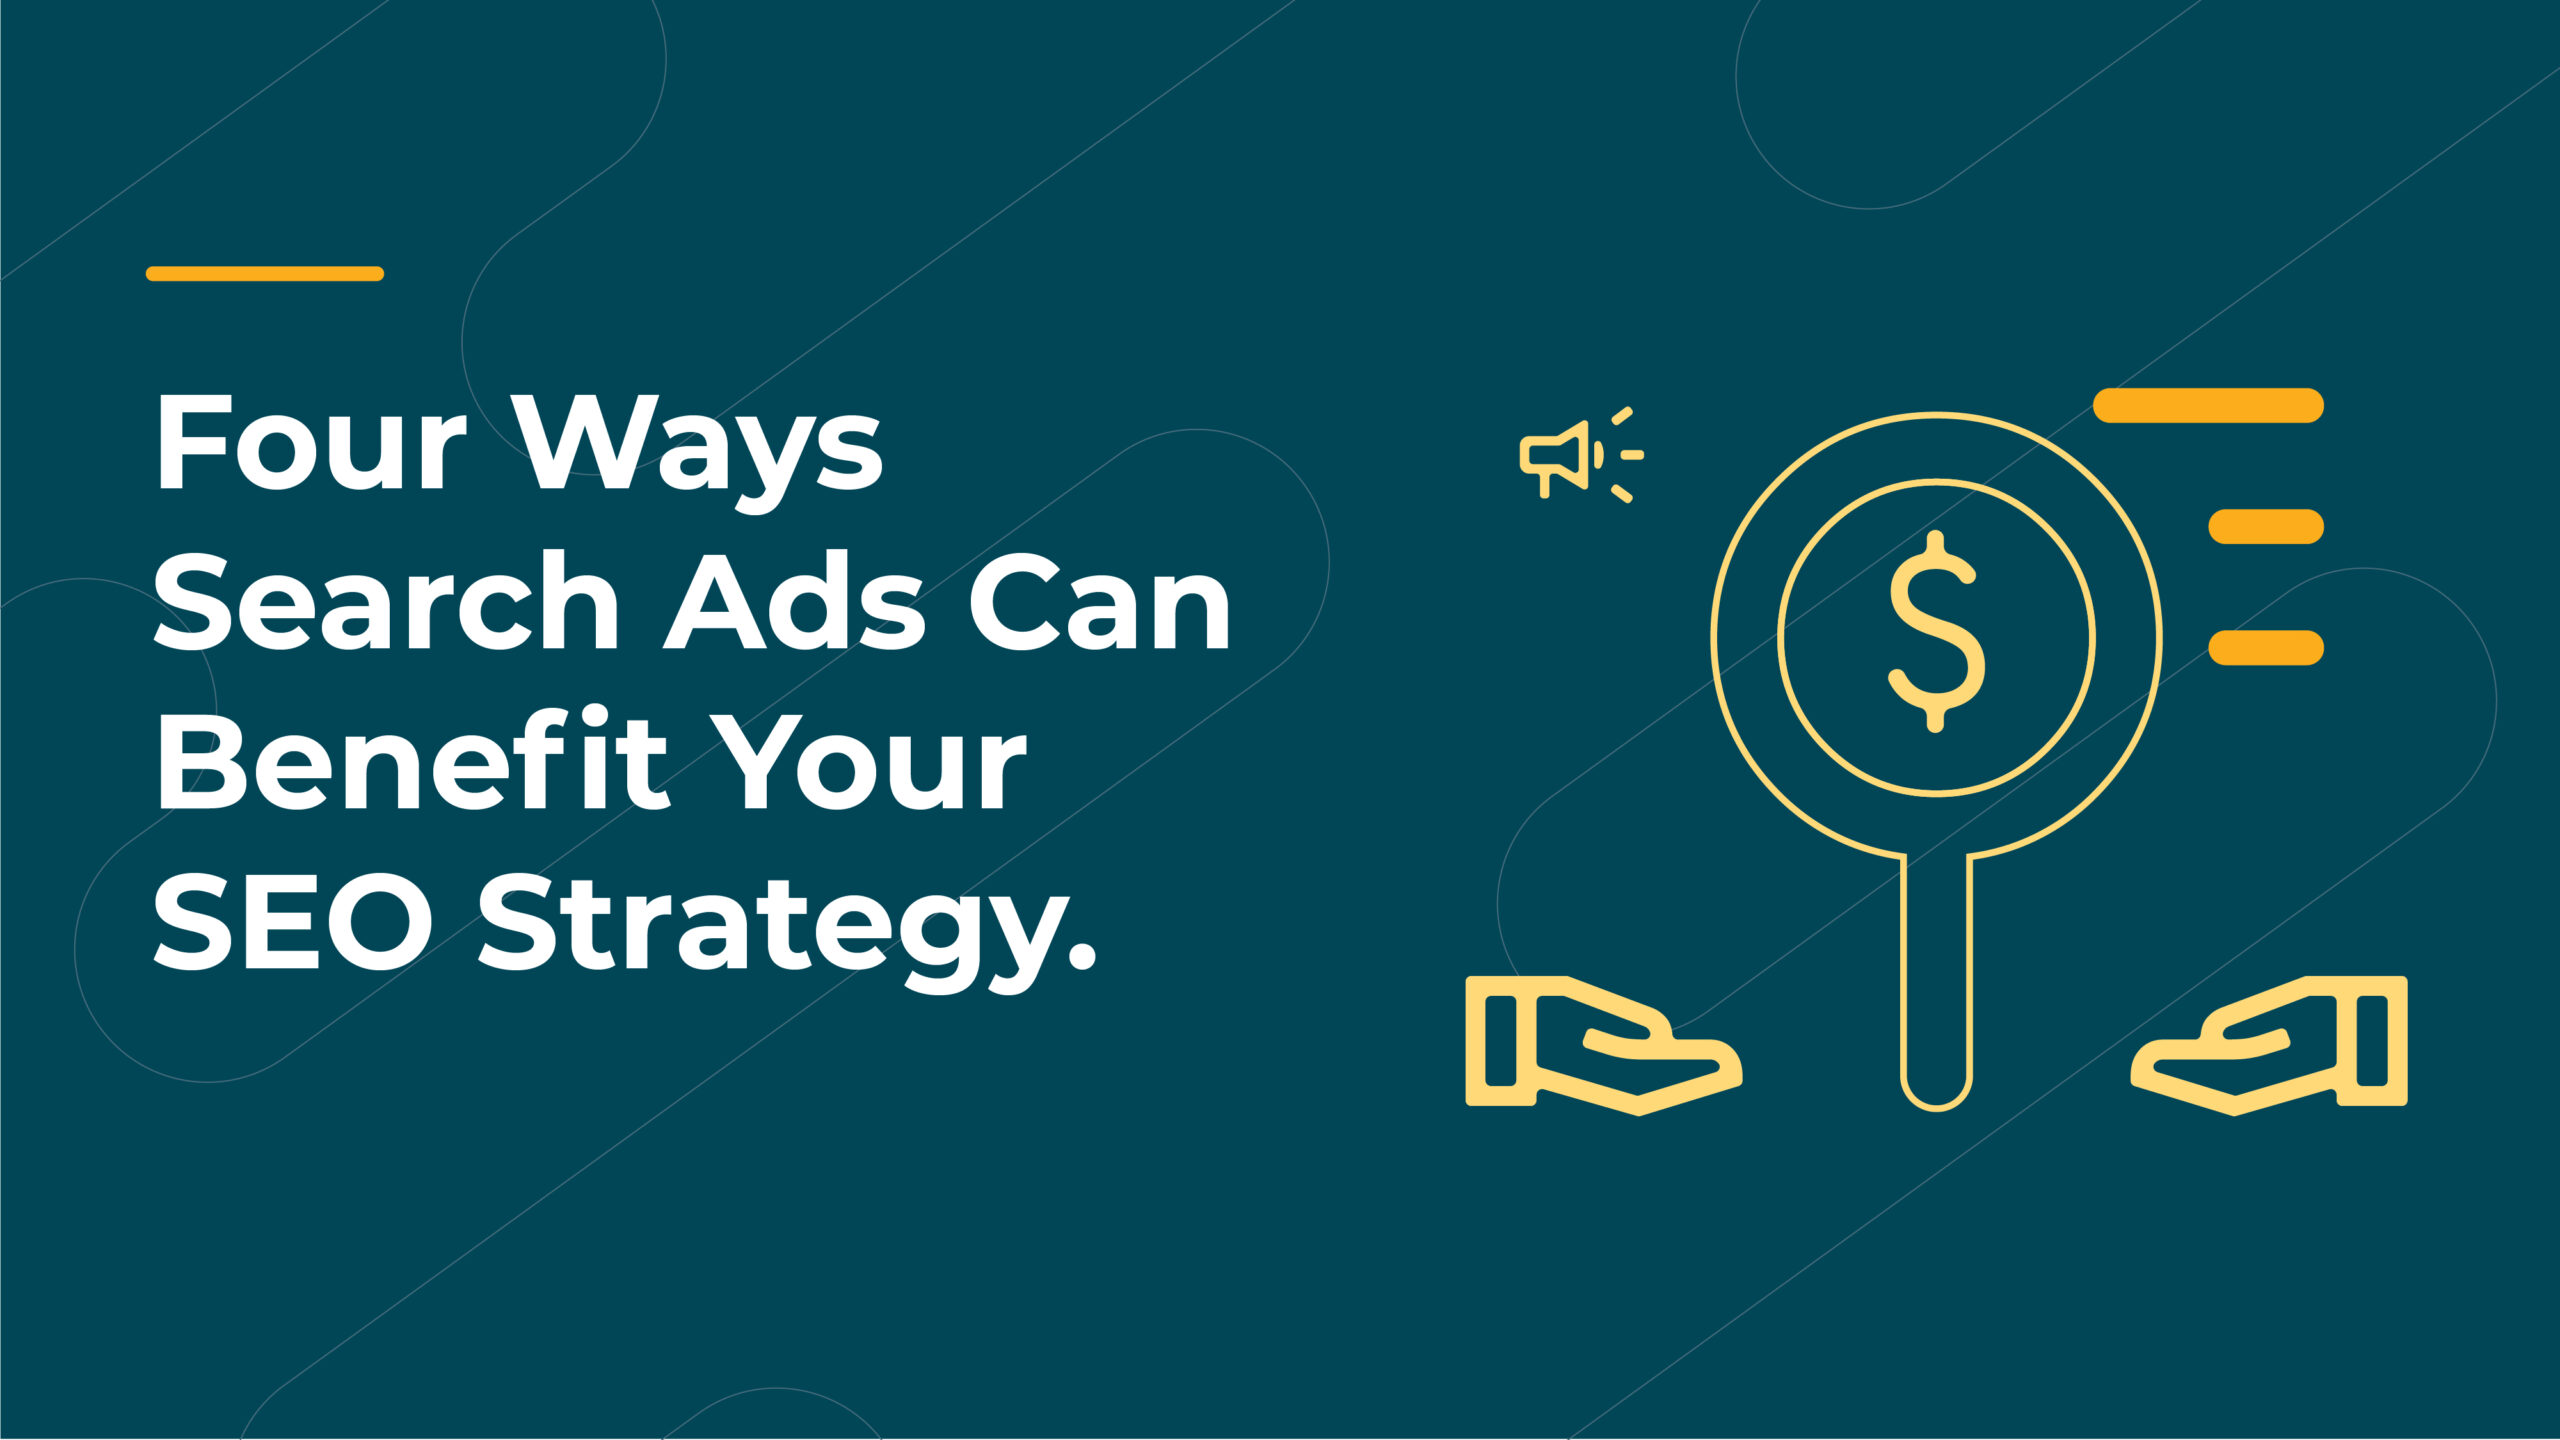 Four ways search ads can benefit your SEO Strategy